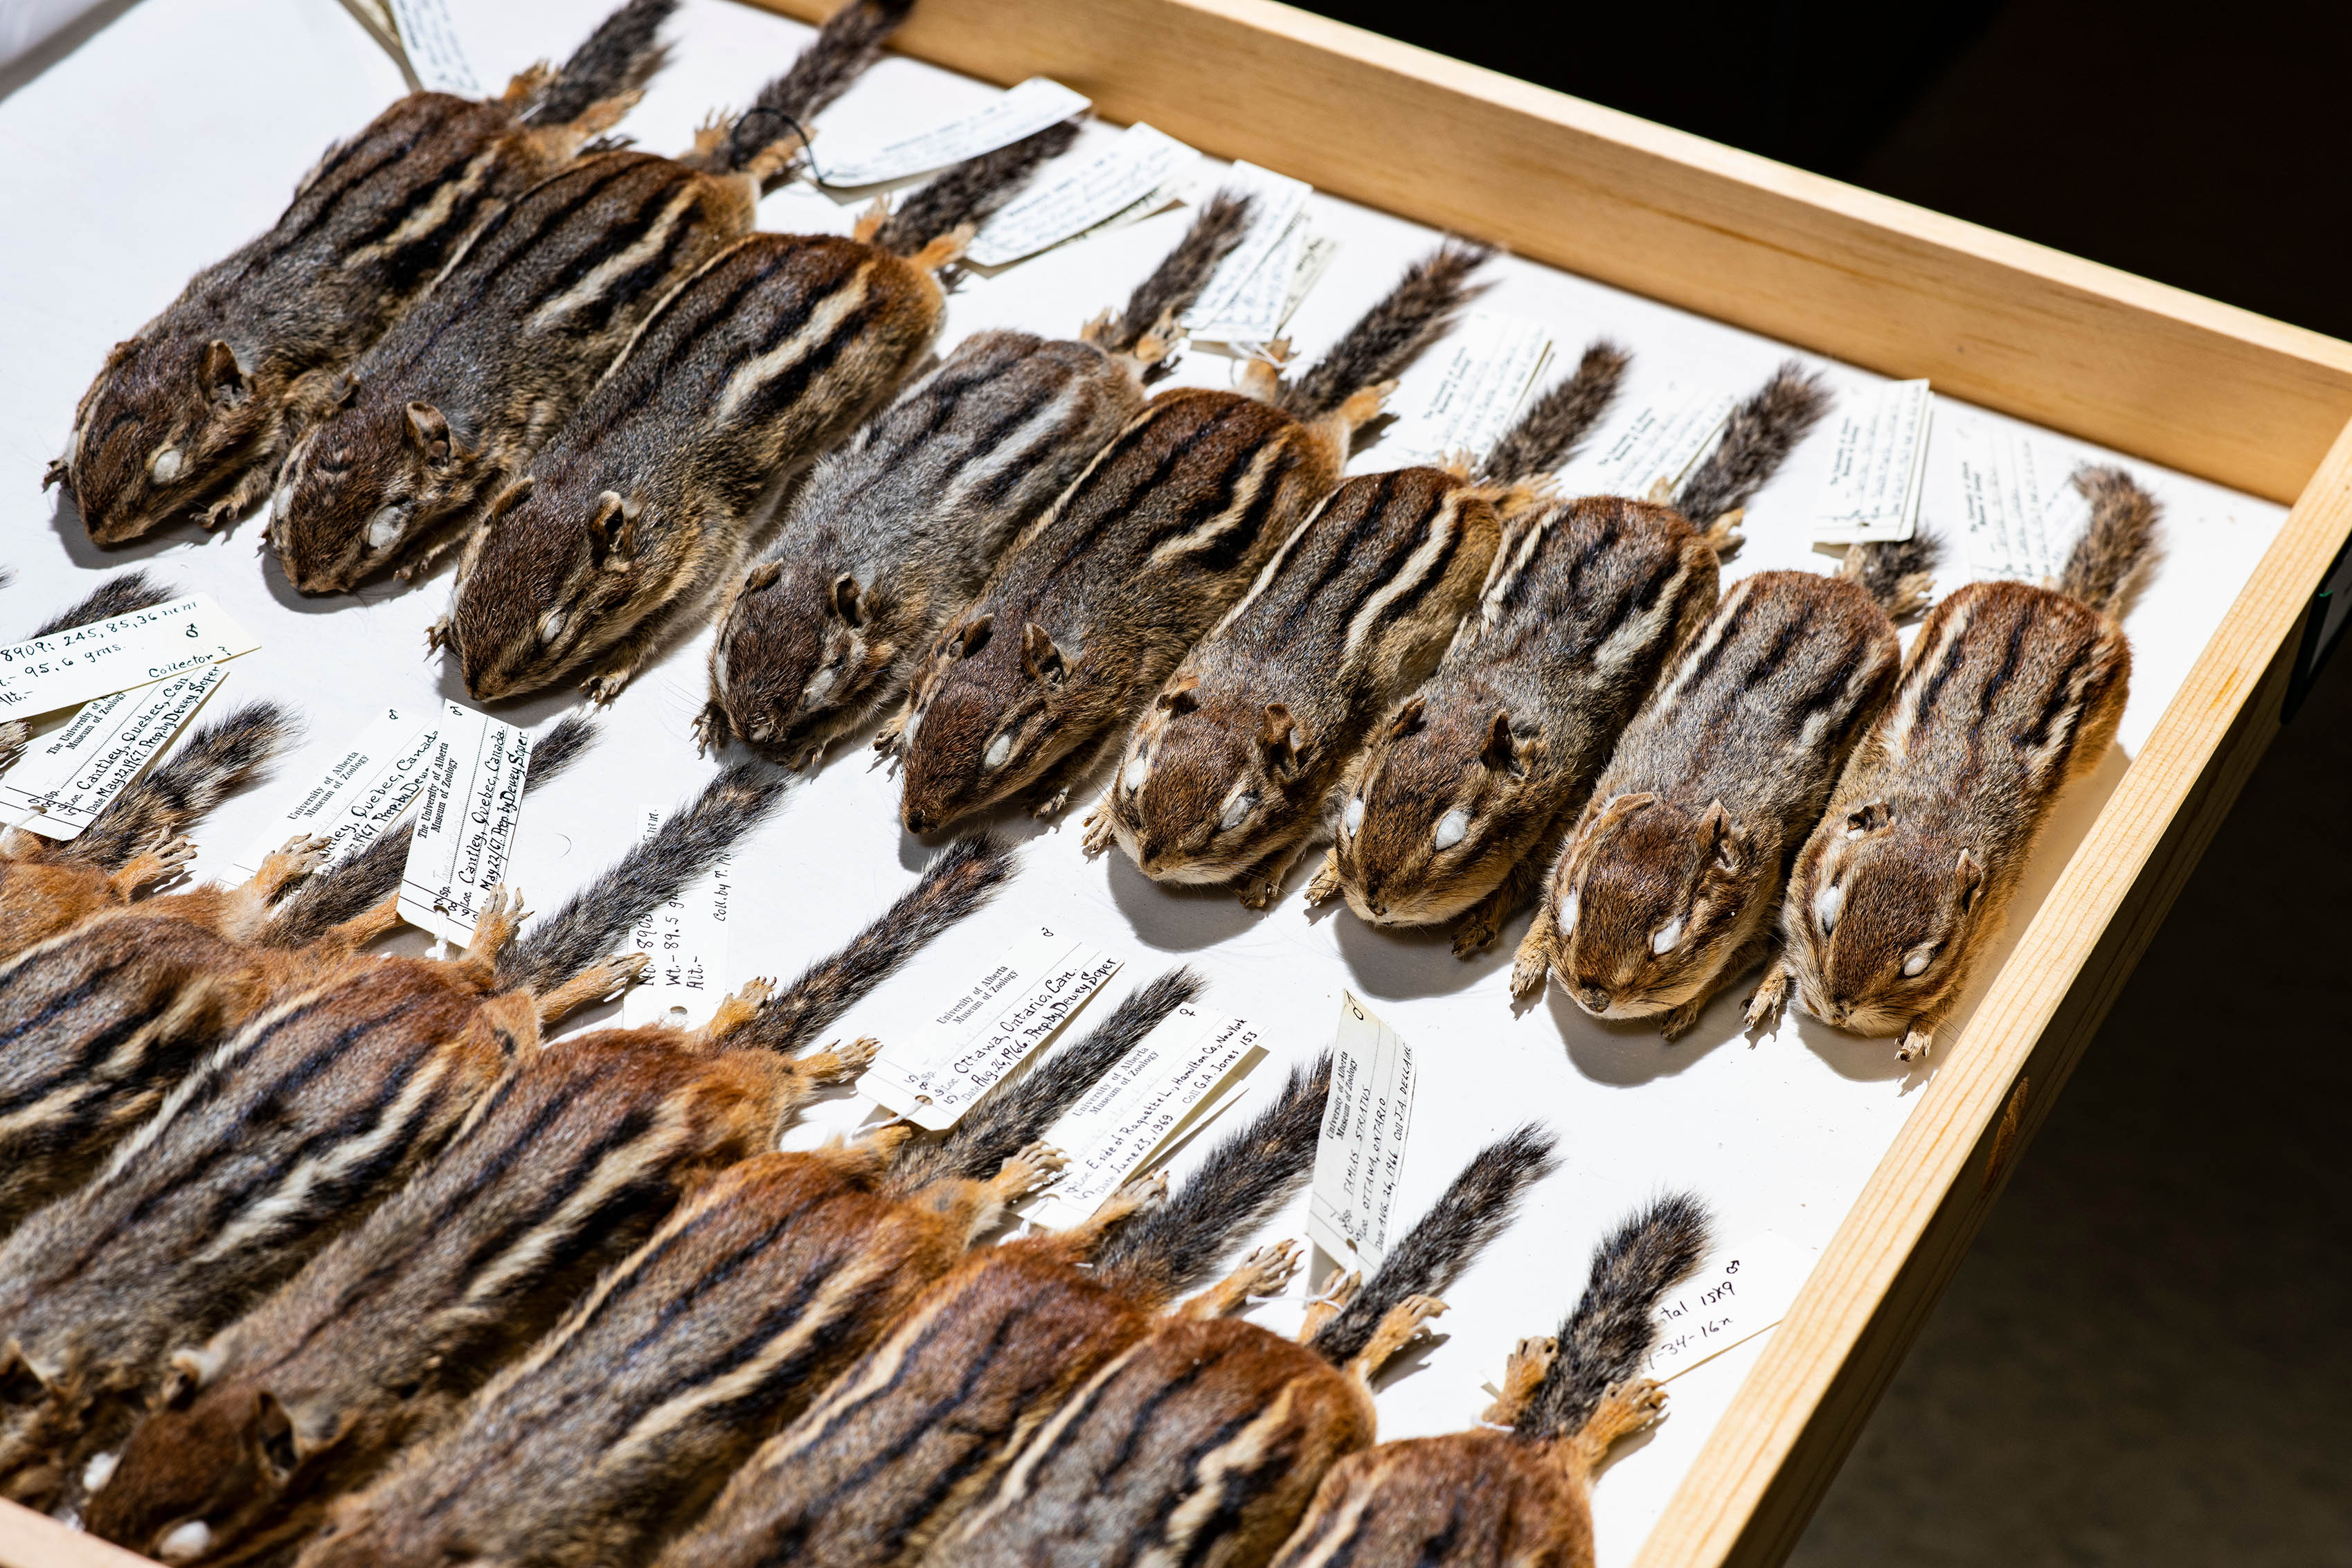 A collection of preserved chipmunks, neatly laid next to one another in two rows on a shallow tray.